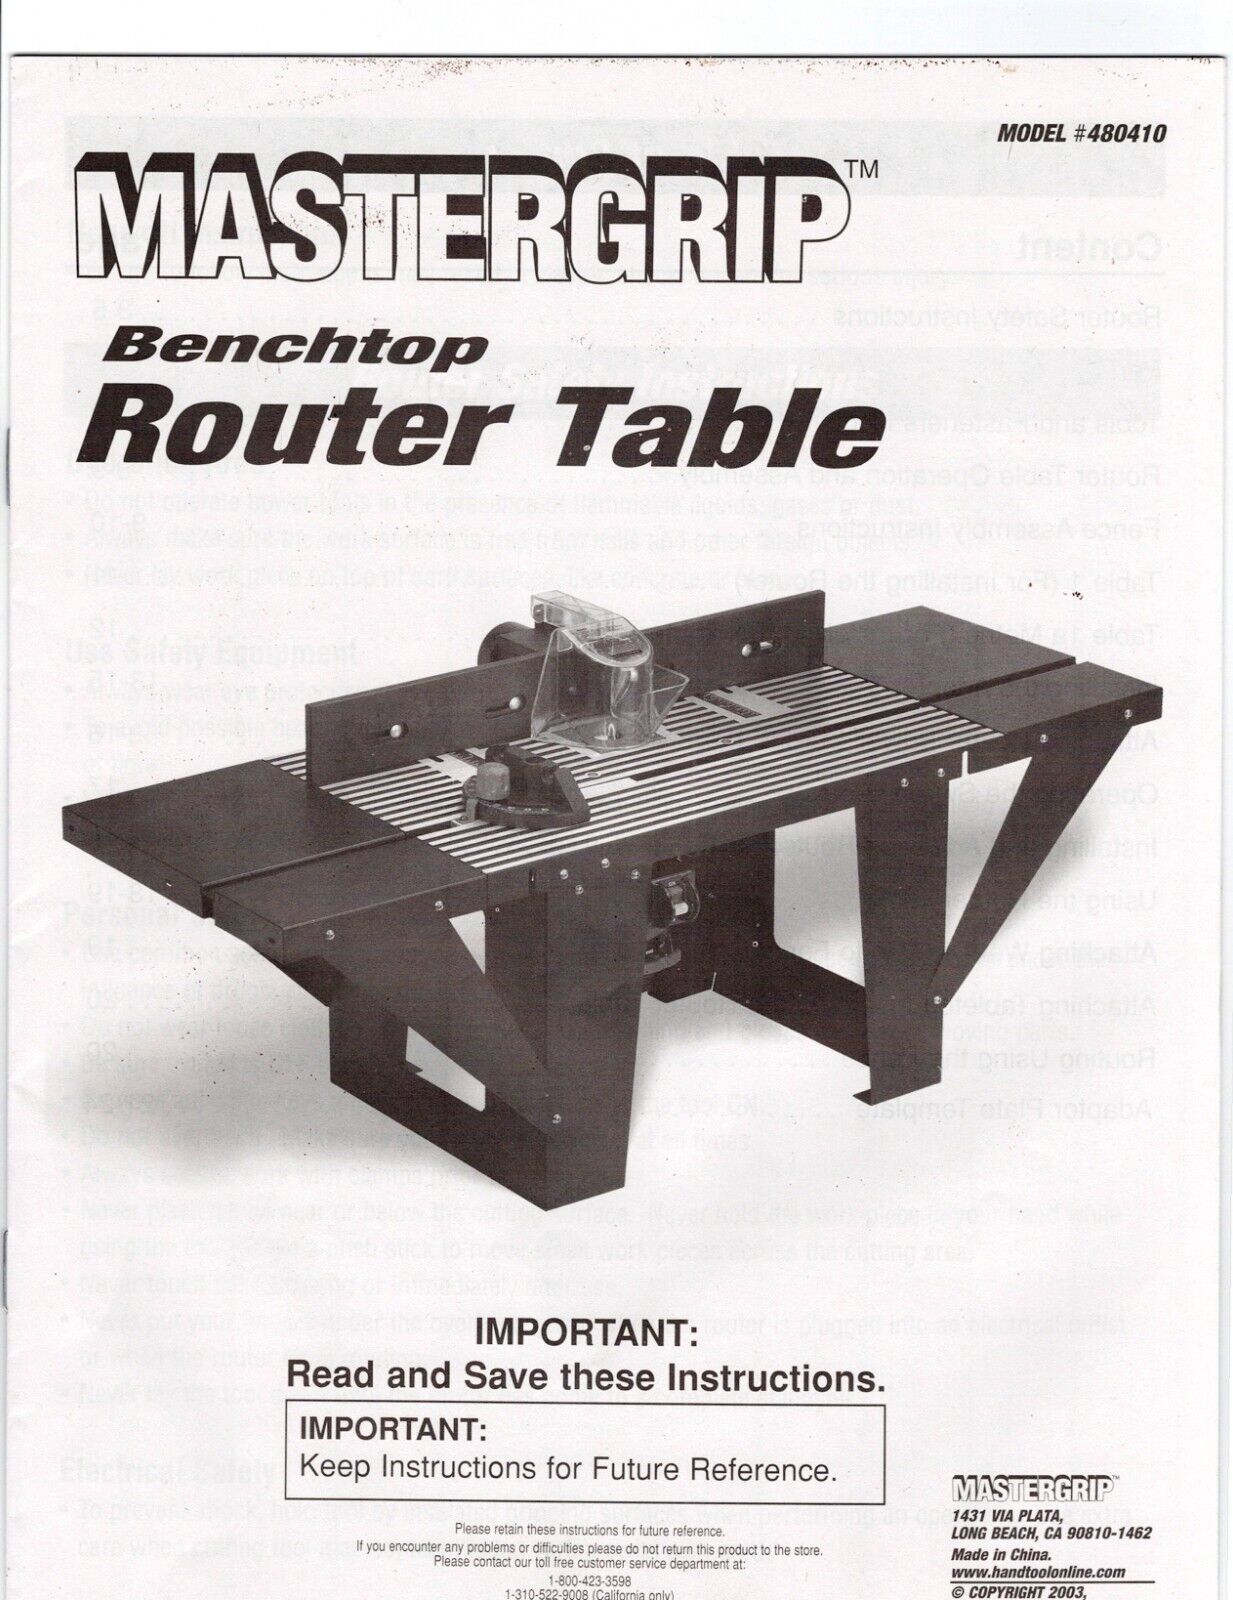 Mastergrip 480410 Bench Top Router Table W/ Power Cord, Fits Most Routers - 120v